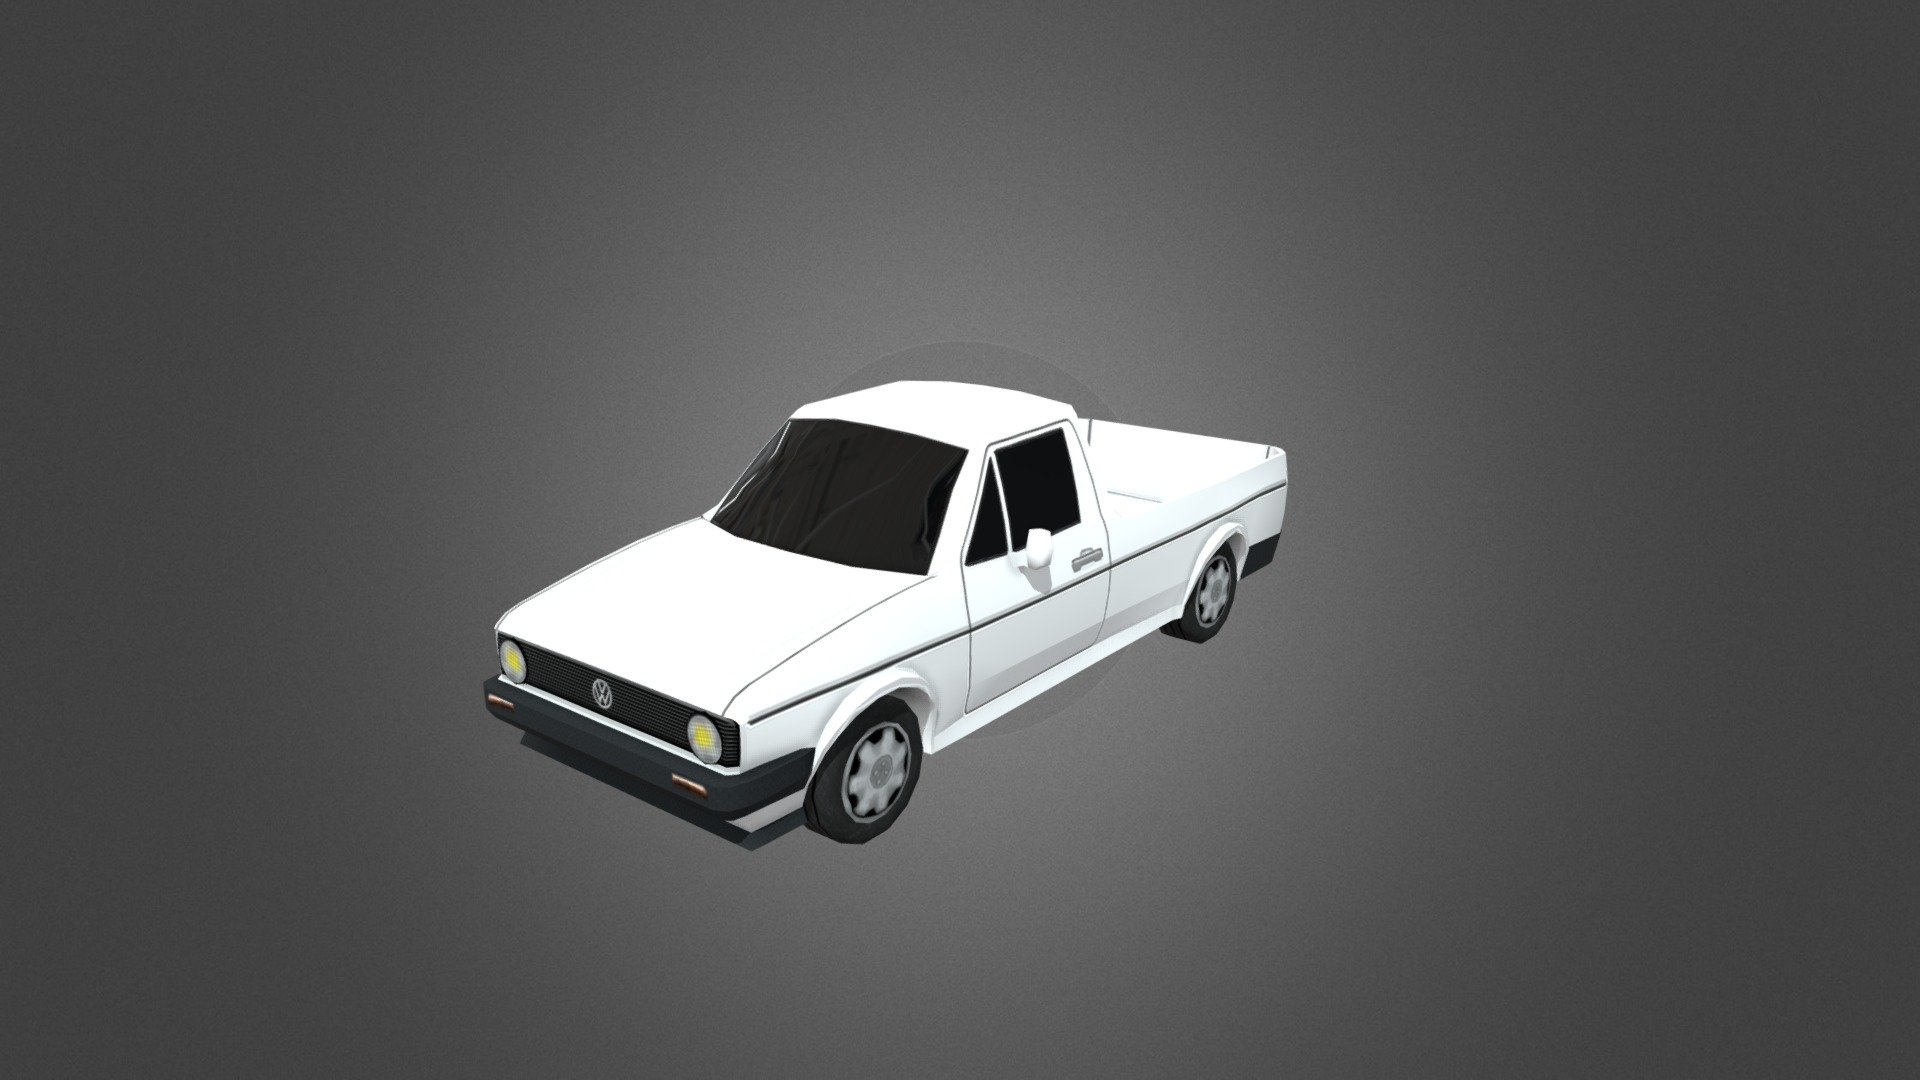 little volkswagen caddy from 1990, i got the idea for this car because i saw one driving in real live, volkswagen in the back was completely painted white, except for &ldquo;swag